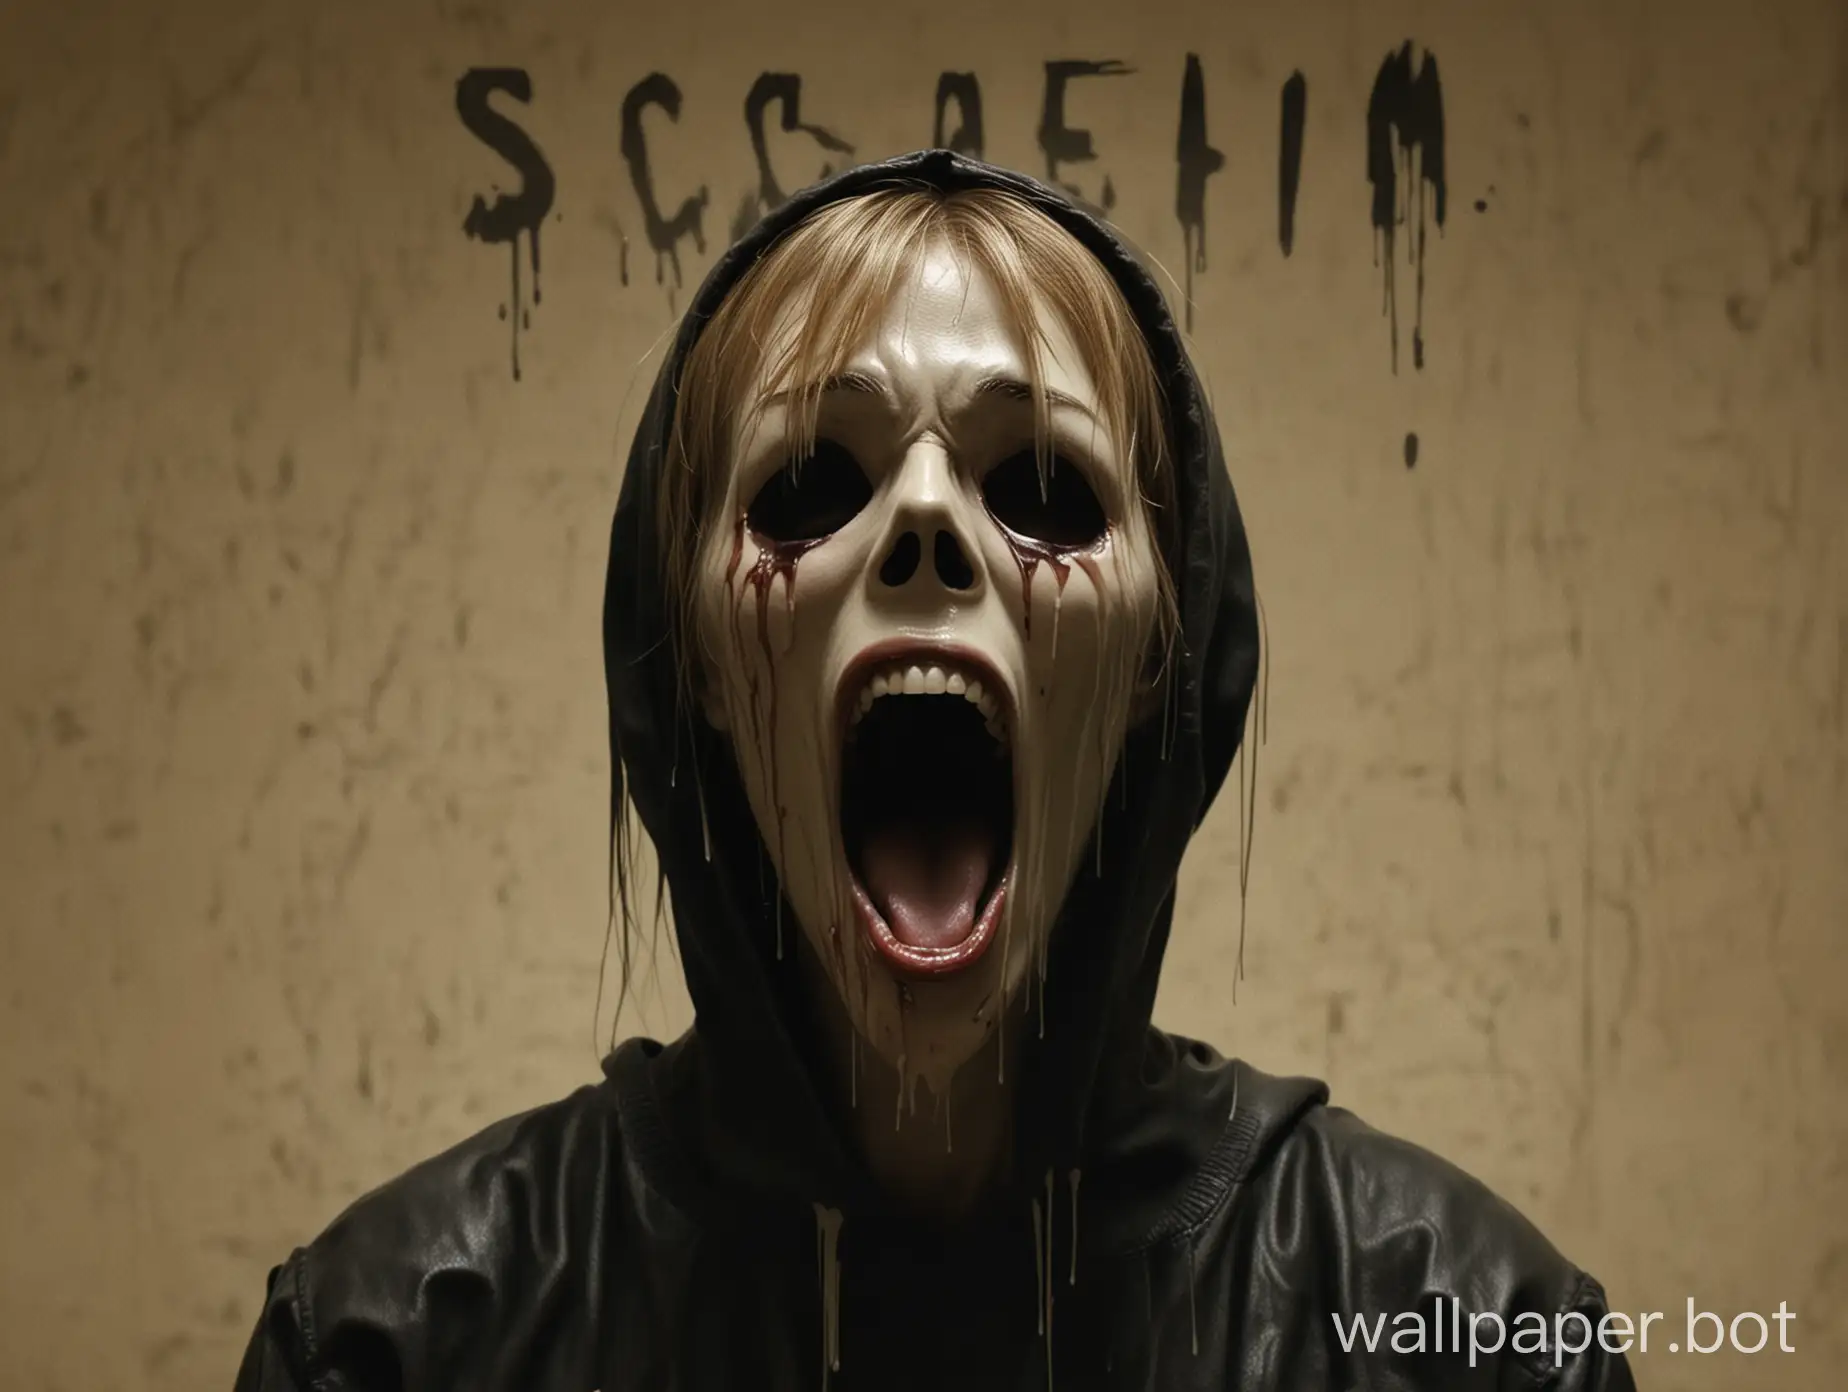  Realistic movie-style wallpaper - "Scream"
(There's no need for translation as the input is already in English)